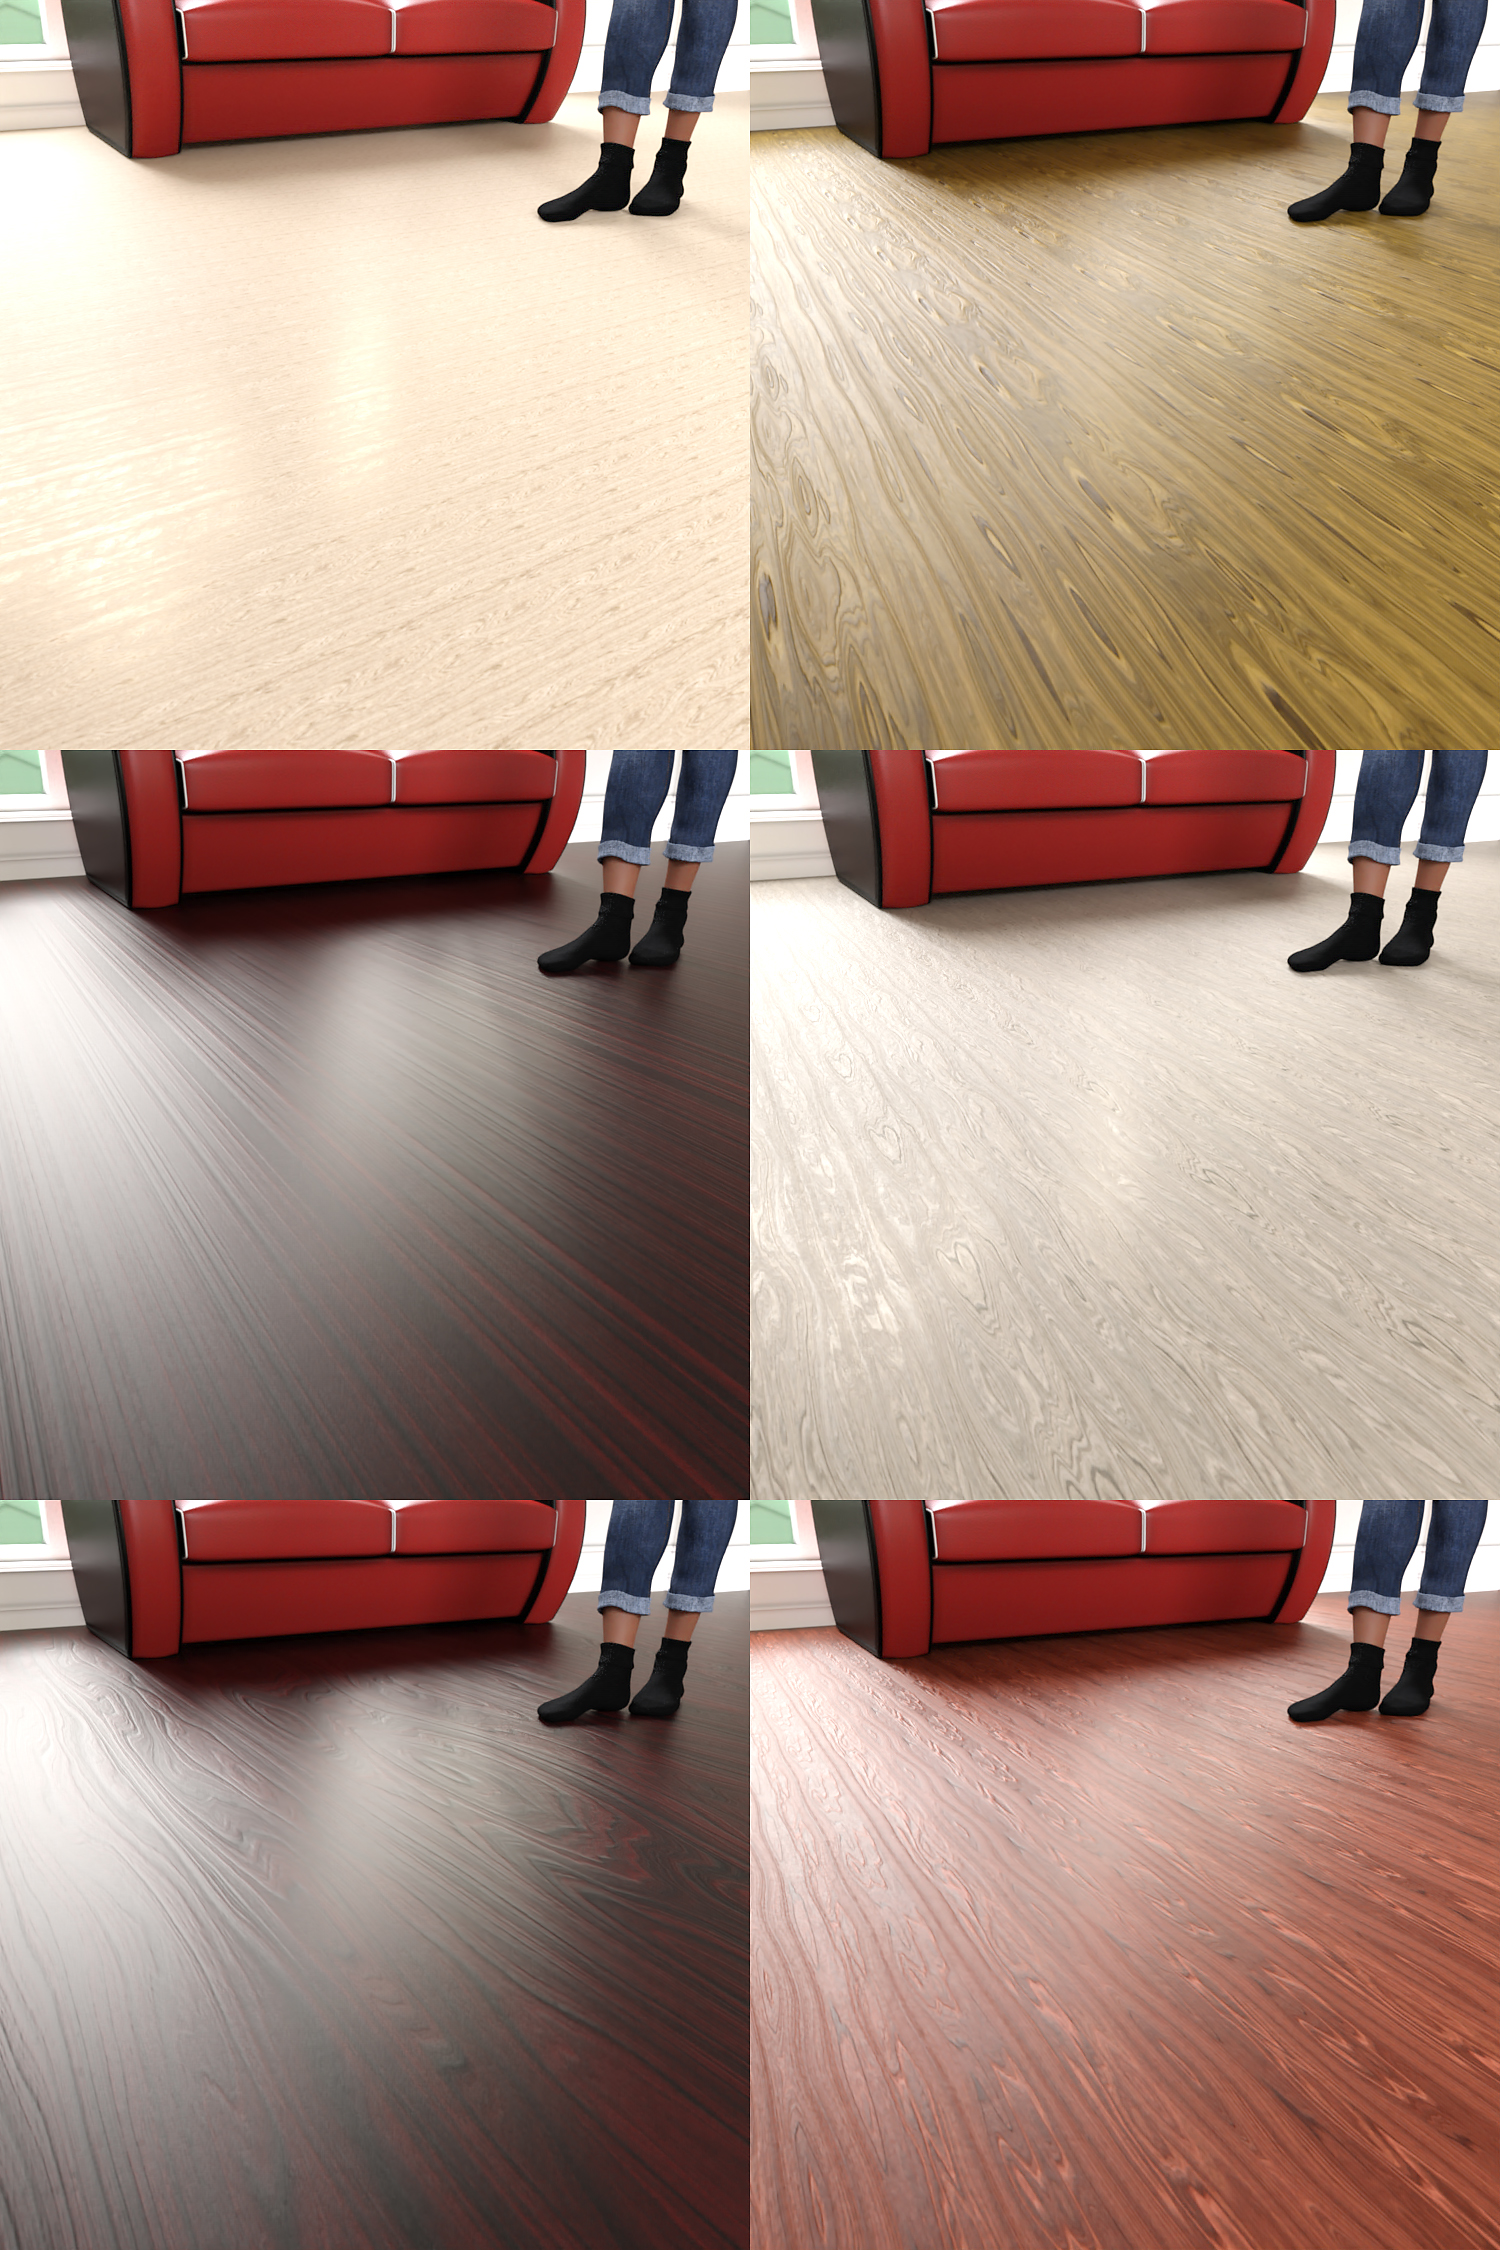 Laminated Wood Floors Iray Shaders by: JGreenlees, 3D Models by Daz 3D